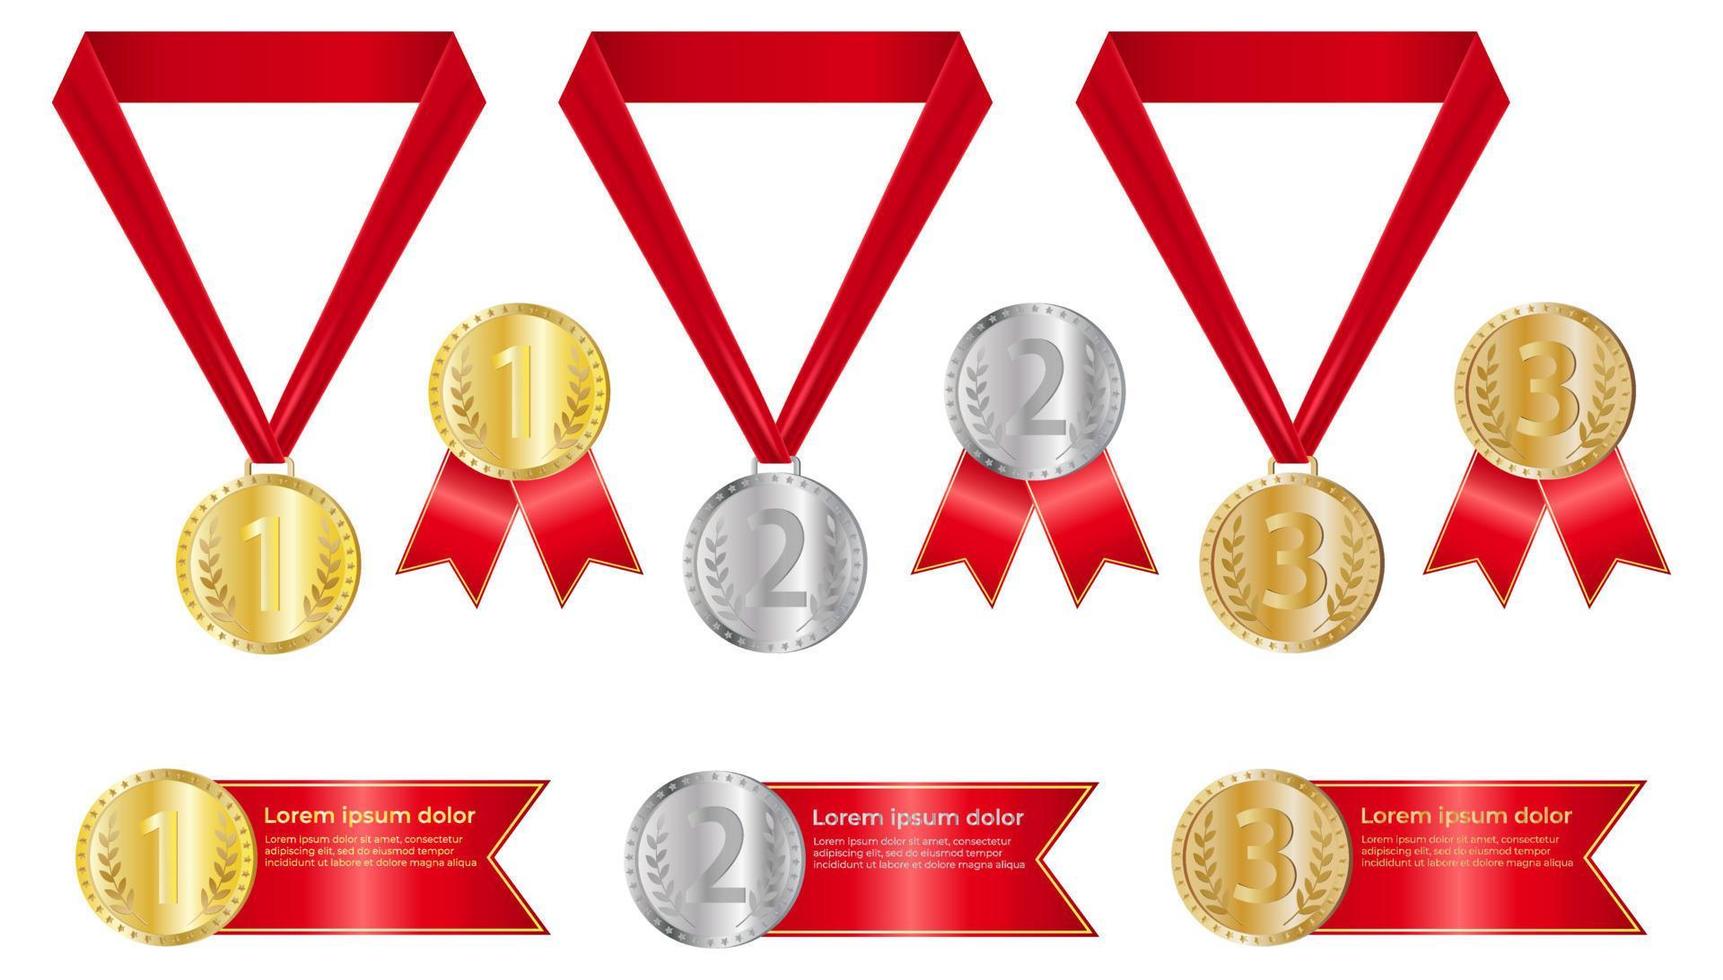 A set of award medals isolated on a white background.Award medals with red ribbons.Gold, silver and bronze medals.. Medals for first, second and third place.Realistic vector illustration